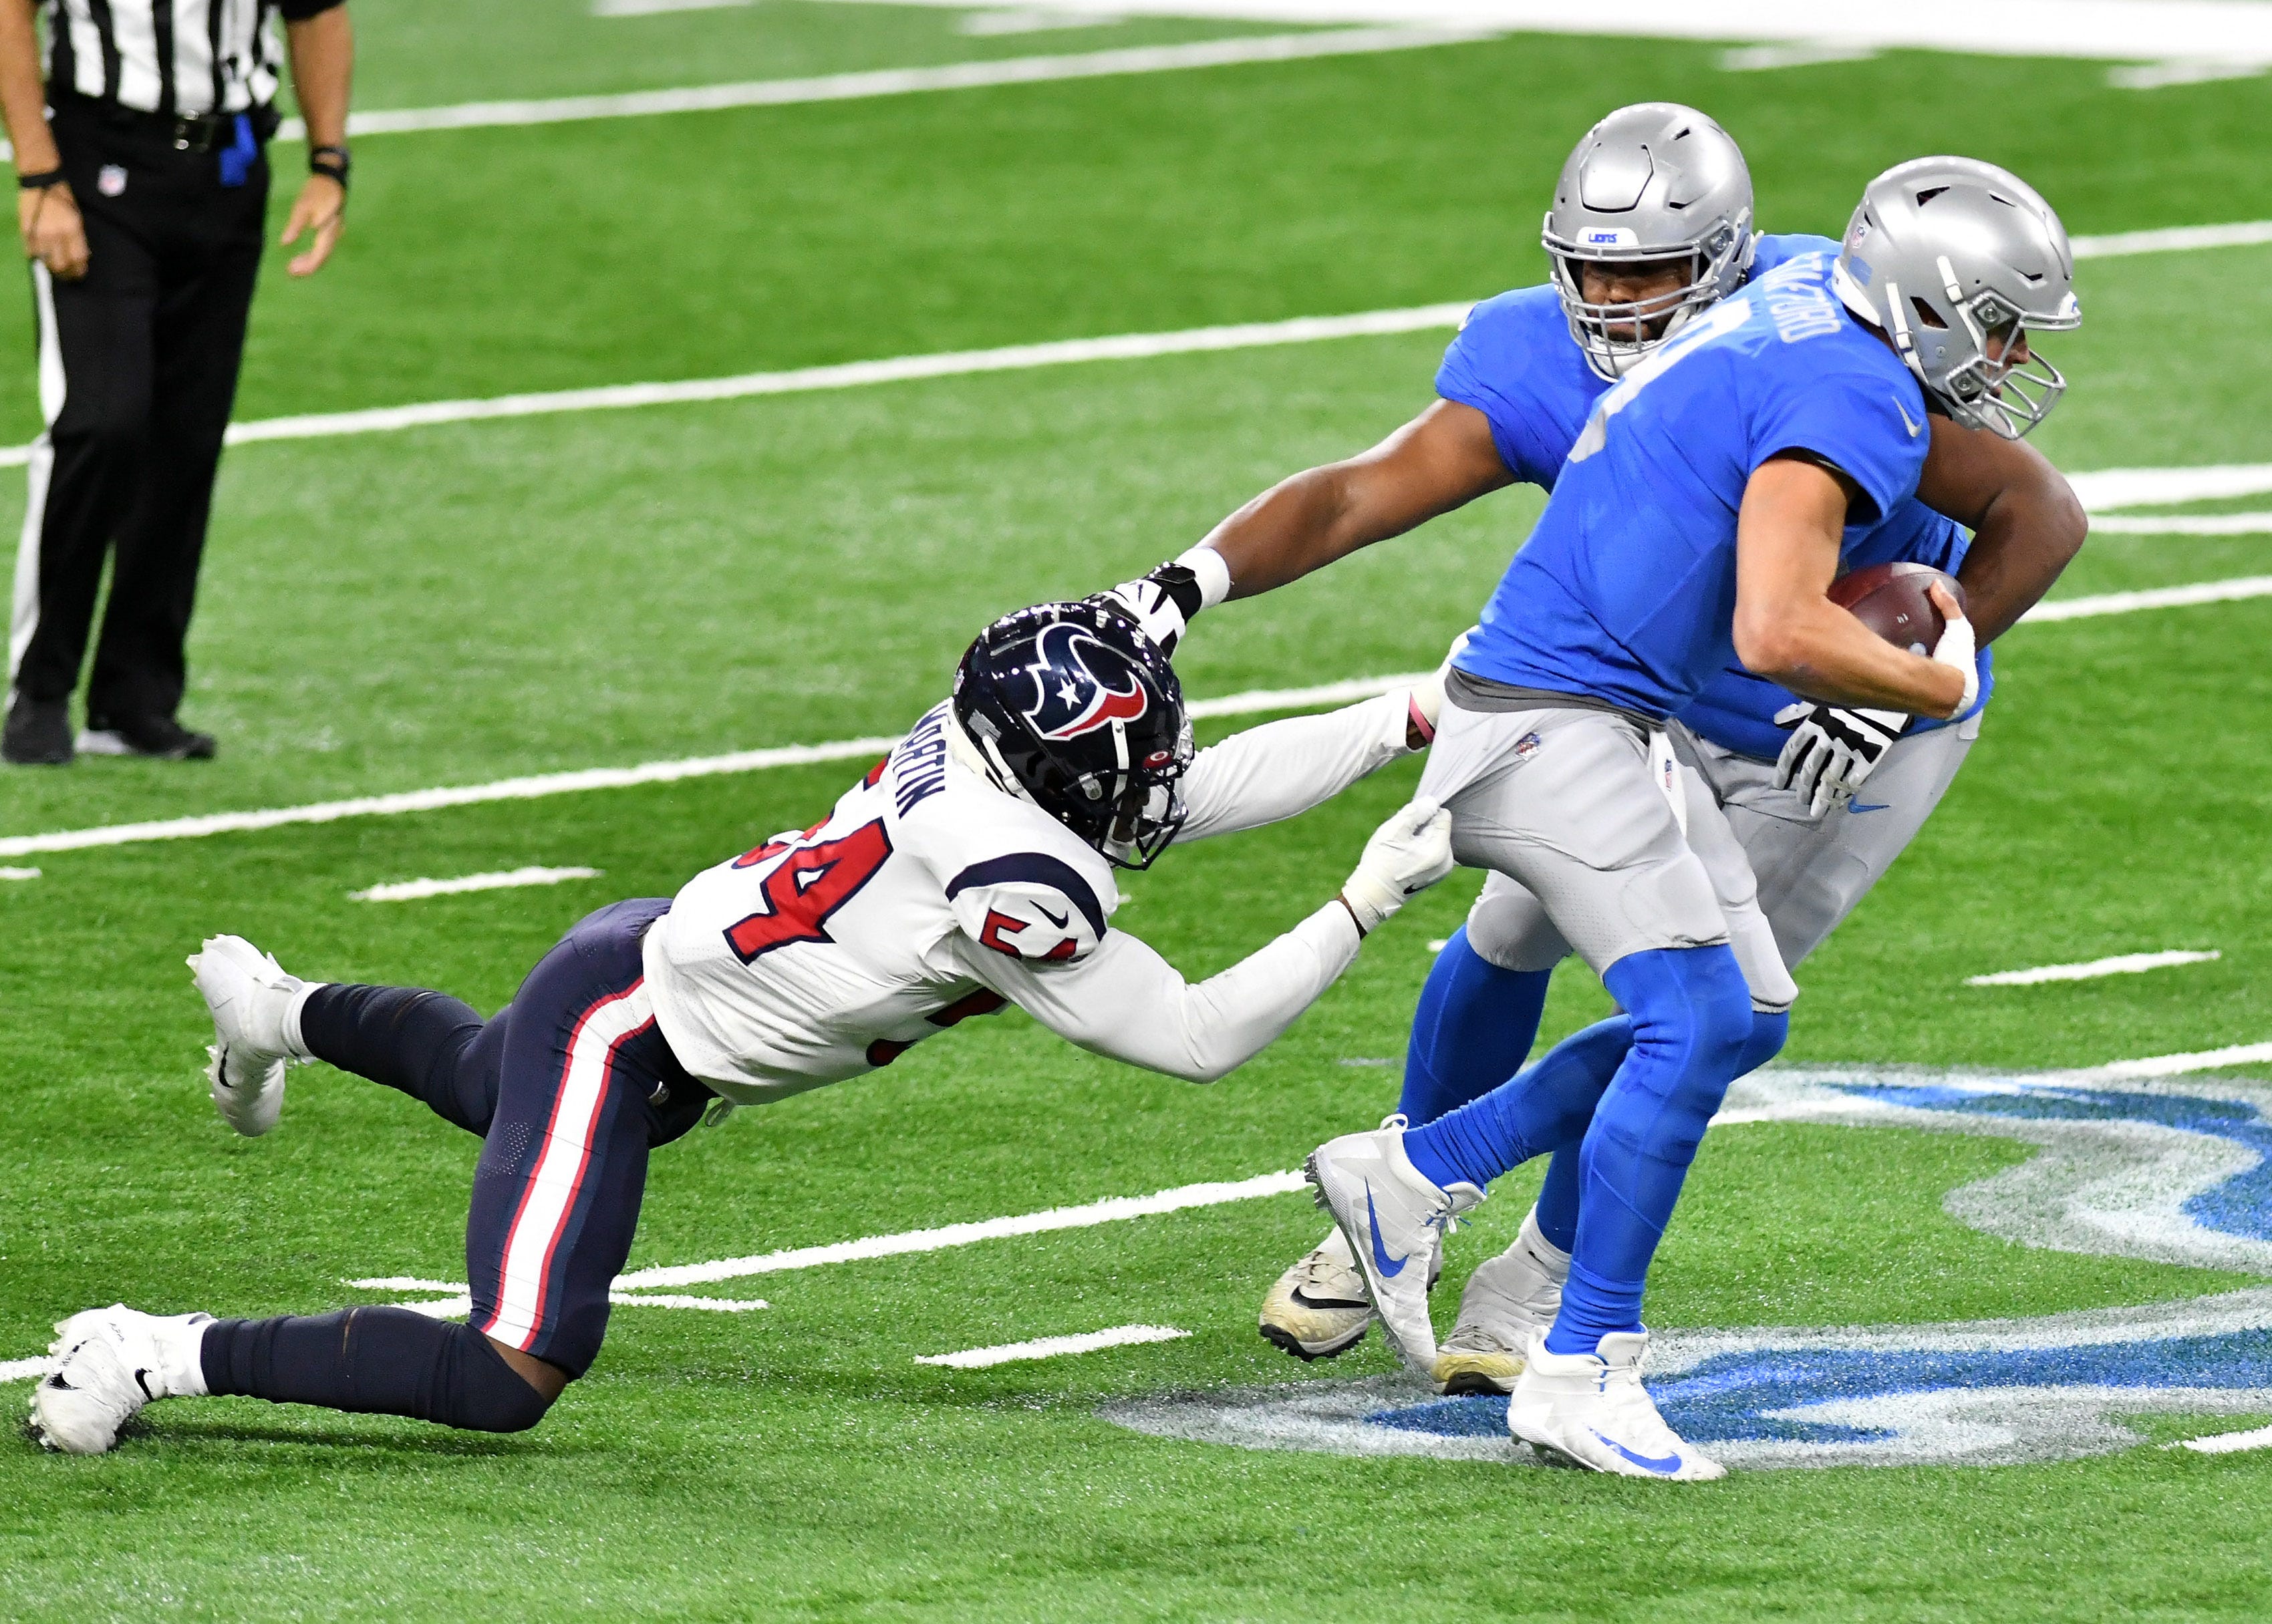 Texans linebacker Jake Martin (54) yanks on the pants of Lions quarterback Matthew Stafford (9) trying to tackle him in the first half.